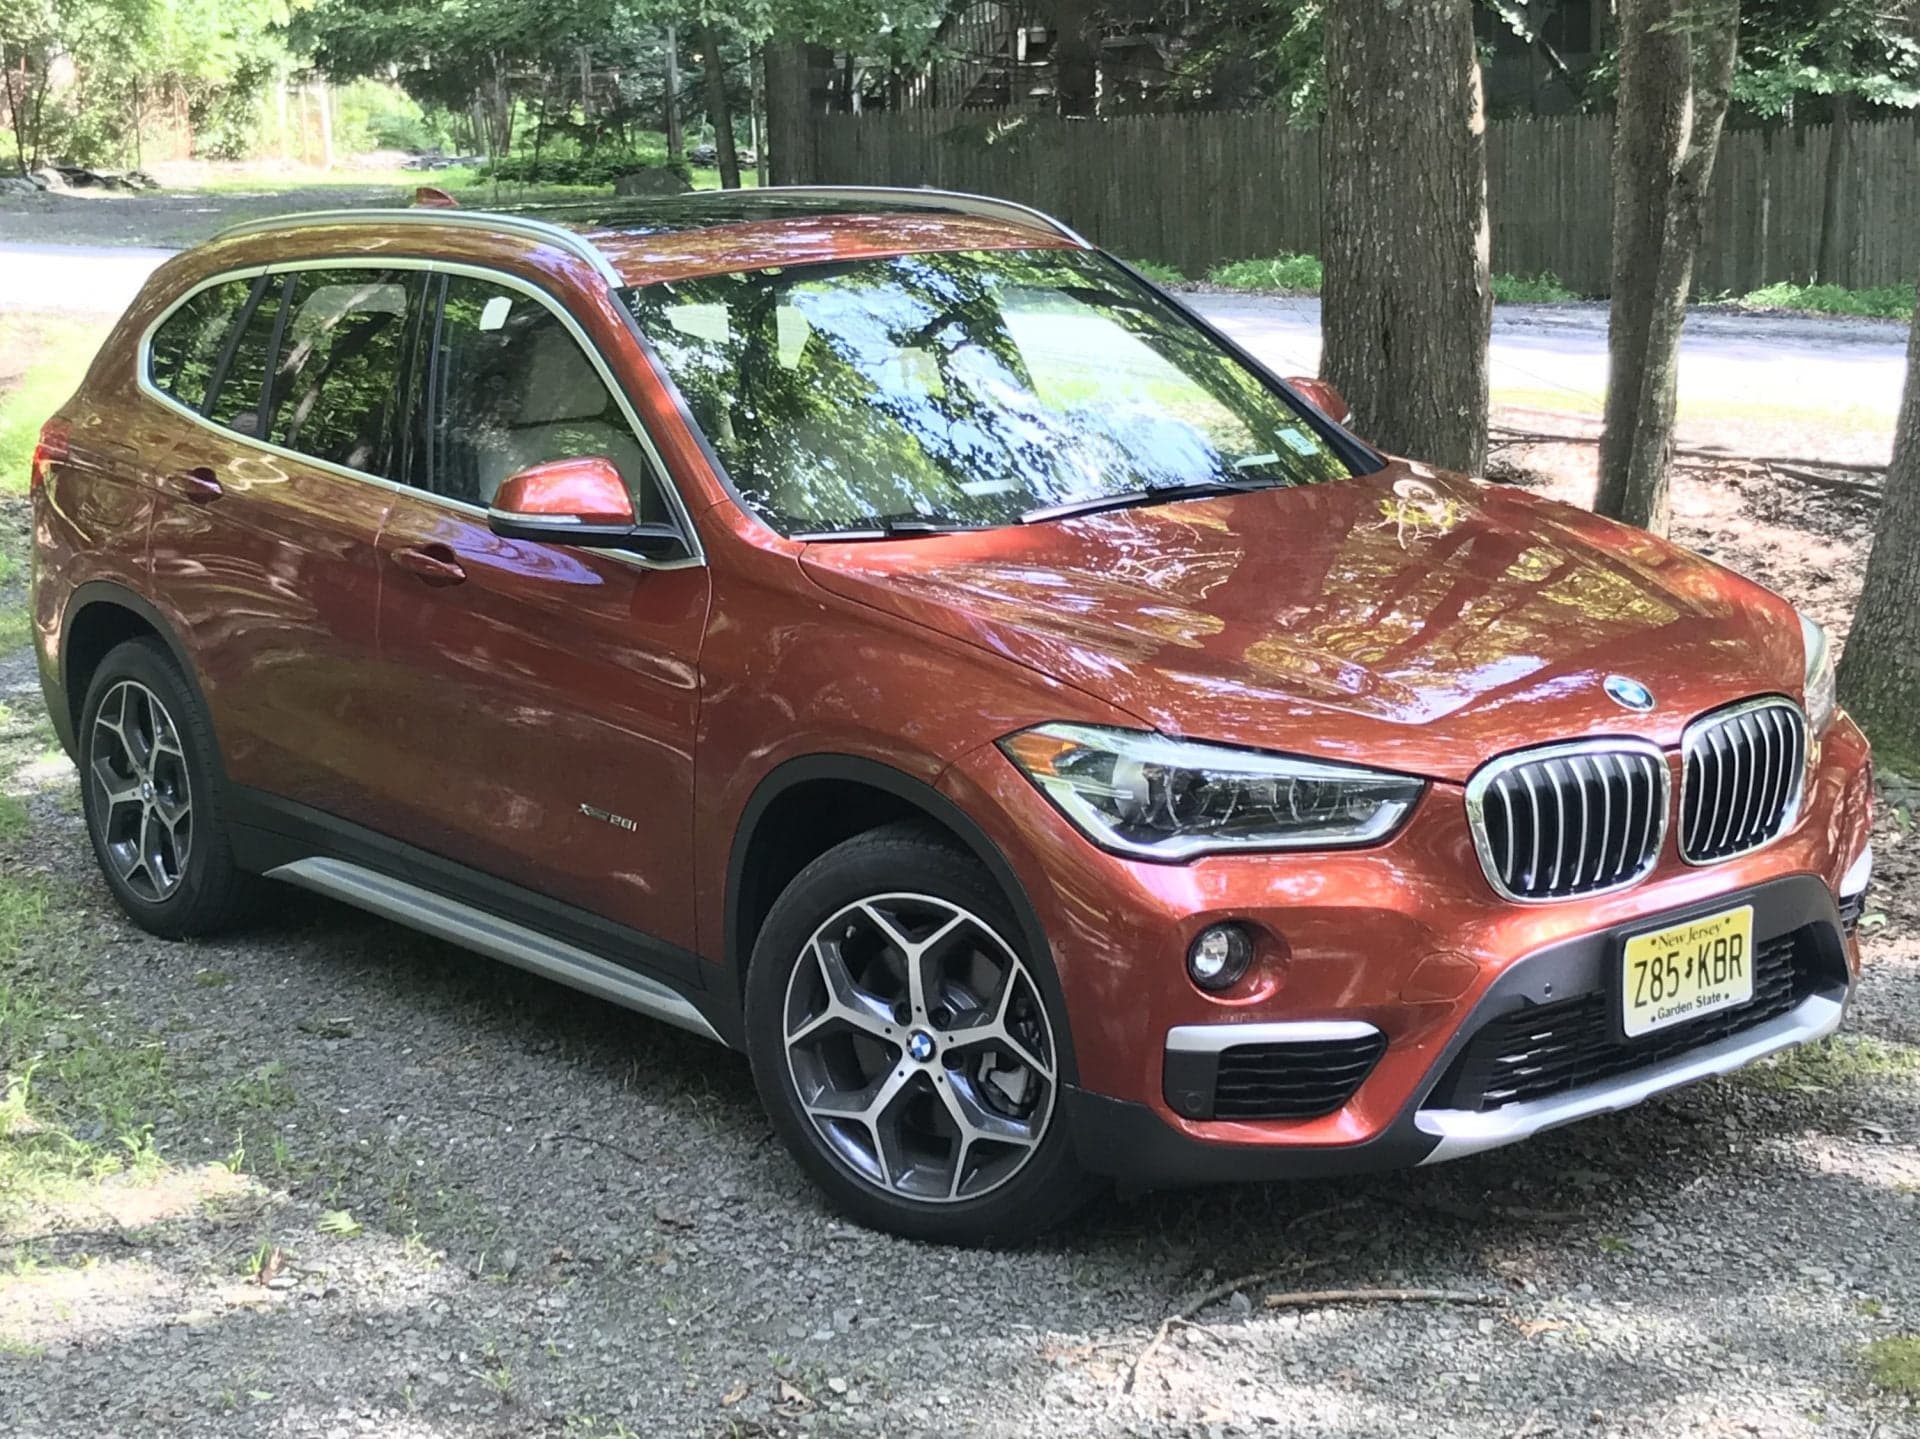 2018 BMW X1 Quick Review: a Good-Driving Crossover More Enjoyable Than a ‘Driver’s Crossover’